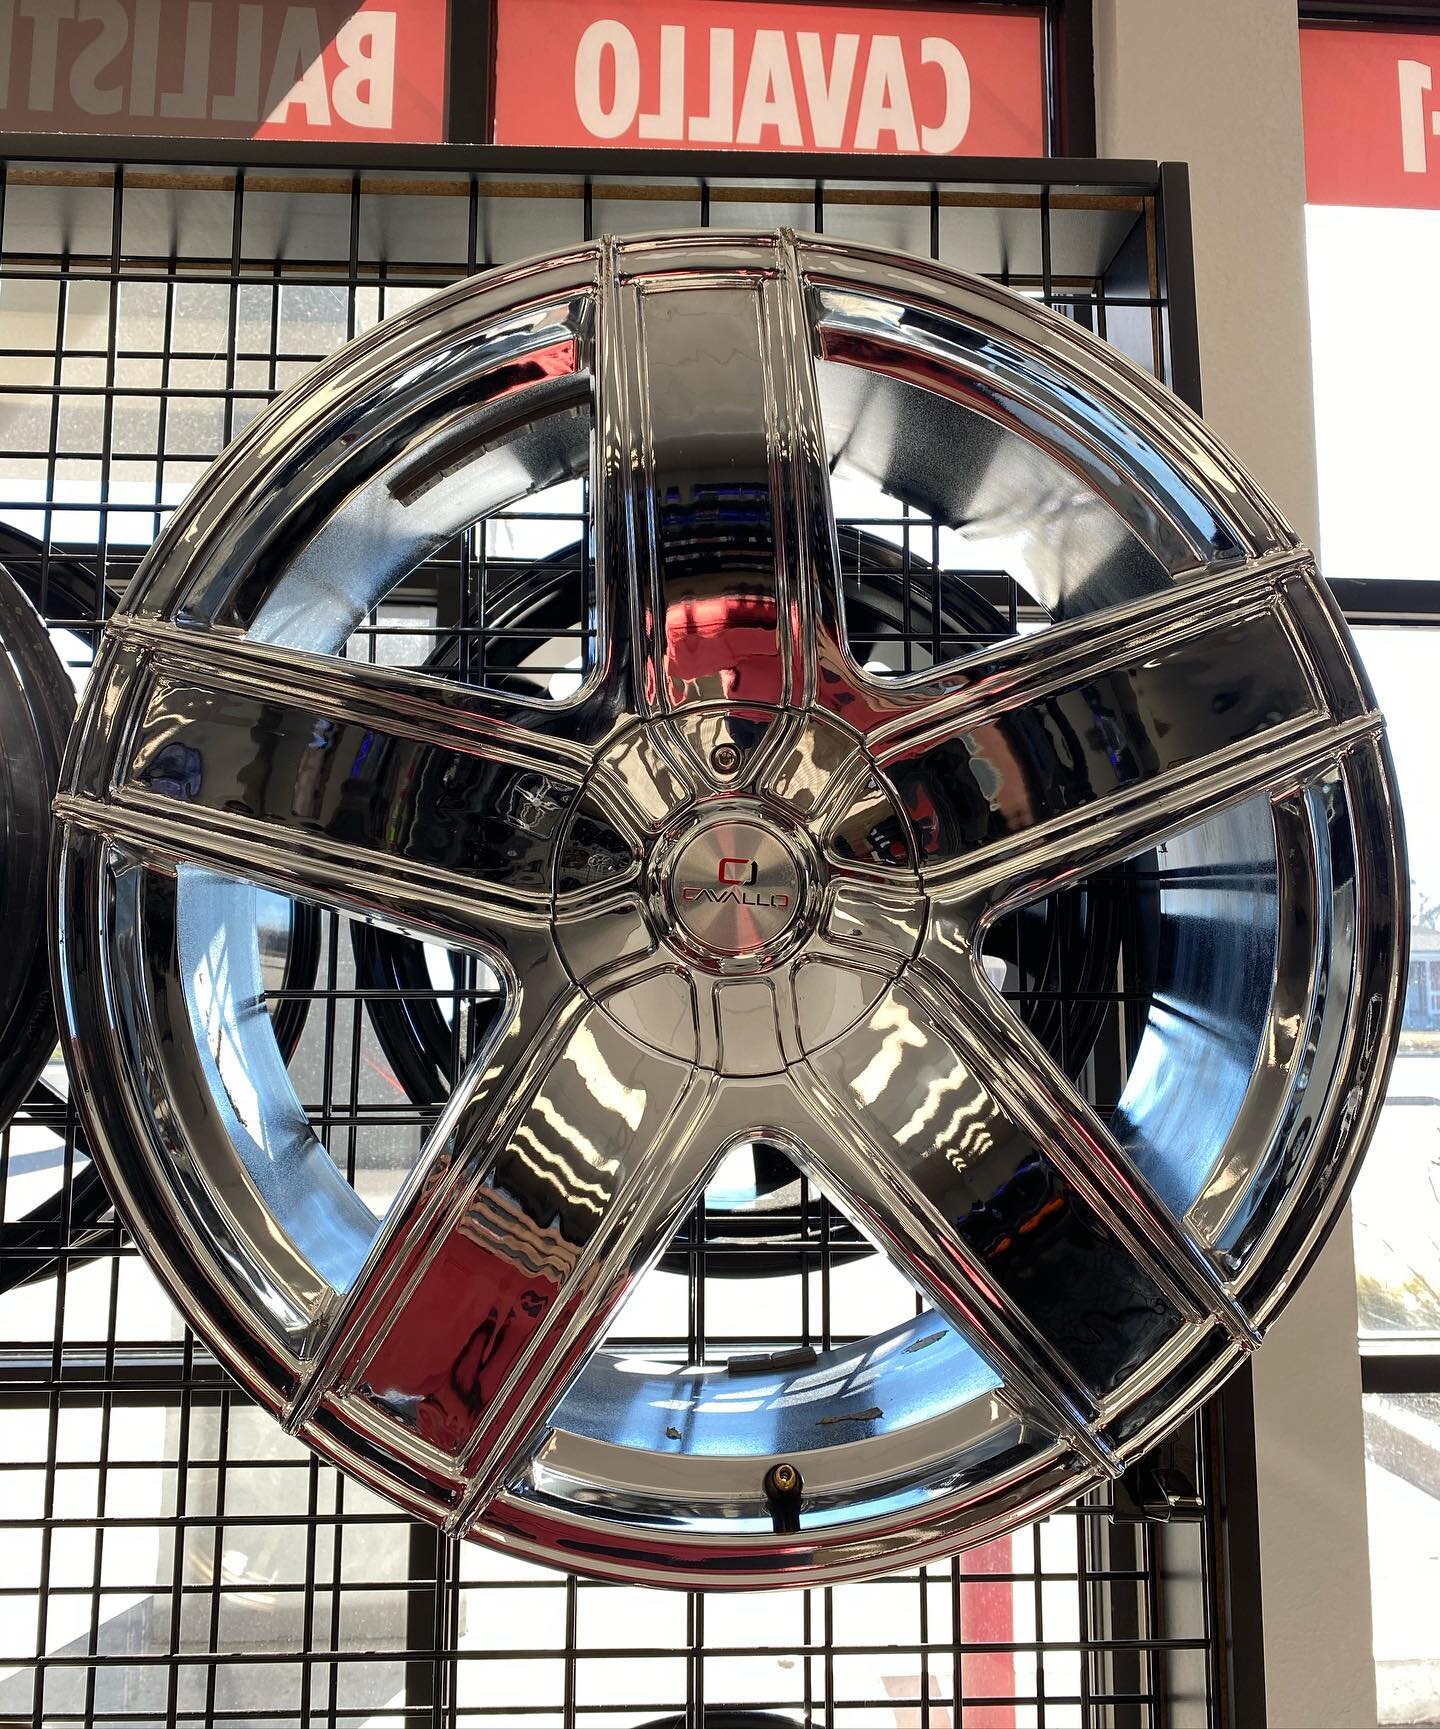 22&rdquo; Chrome Cavallos!!! And just $5 down with us. Get these installed on your vehicle today!!! #chromerims #okc
.
.
.
.
.
.
.
.
.
.
#cavallo #cavallorims #chromerims #chromewheels #22inch #22inchrims #oklahomacity #rimsforsale #wheelsforsale #us